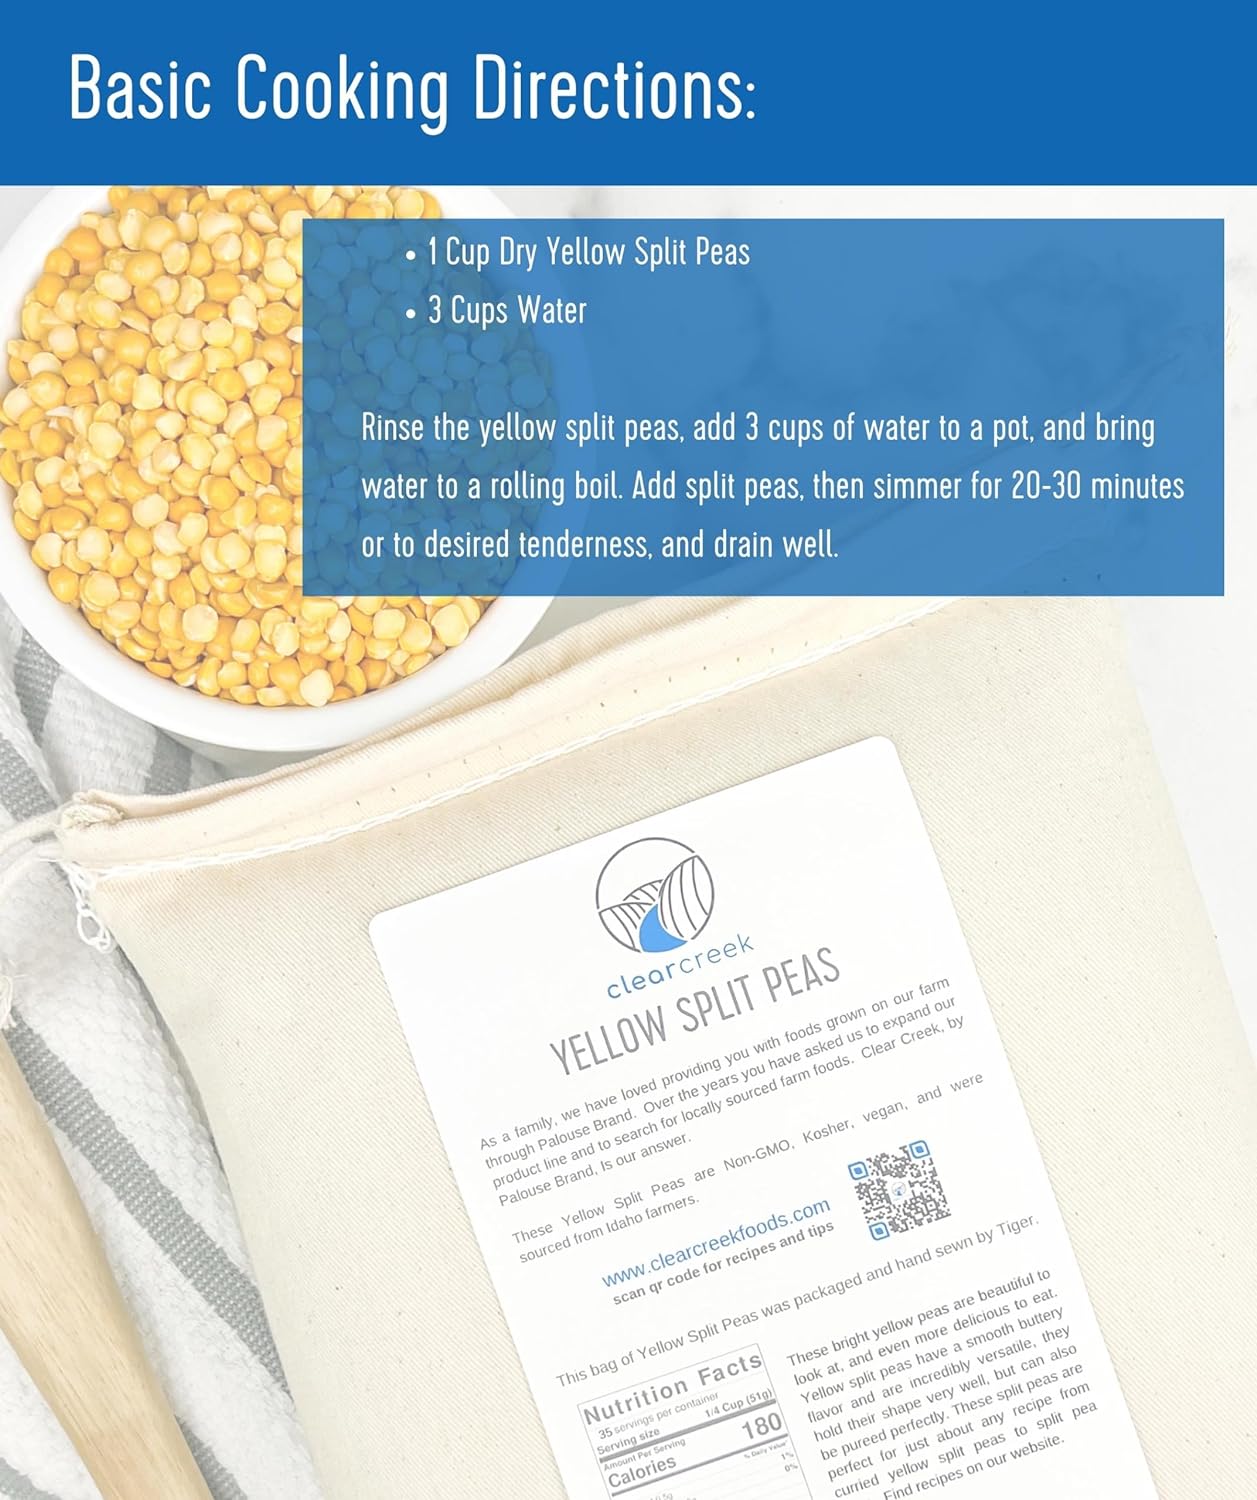 Idaho Yellow Split Peas | 25 lb Bag | Non-GMO | Kosher | Vegan | Dried | High in Fiber and Protein | Non-Irradiated : Grocery & Gourmet Food